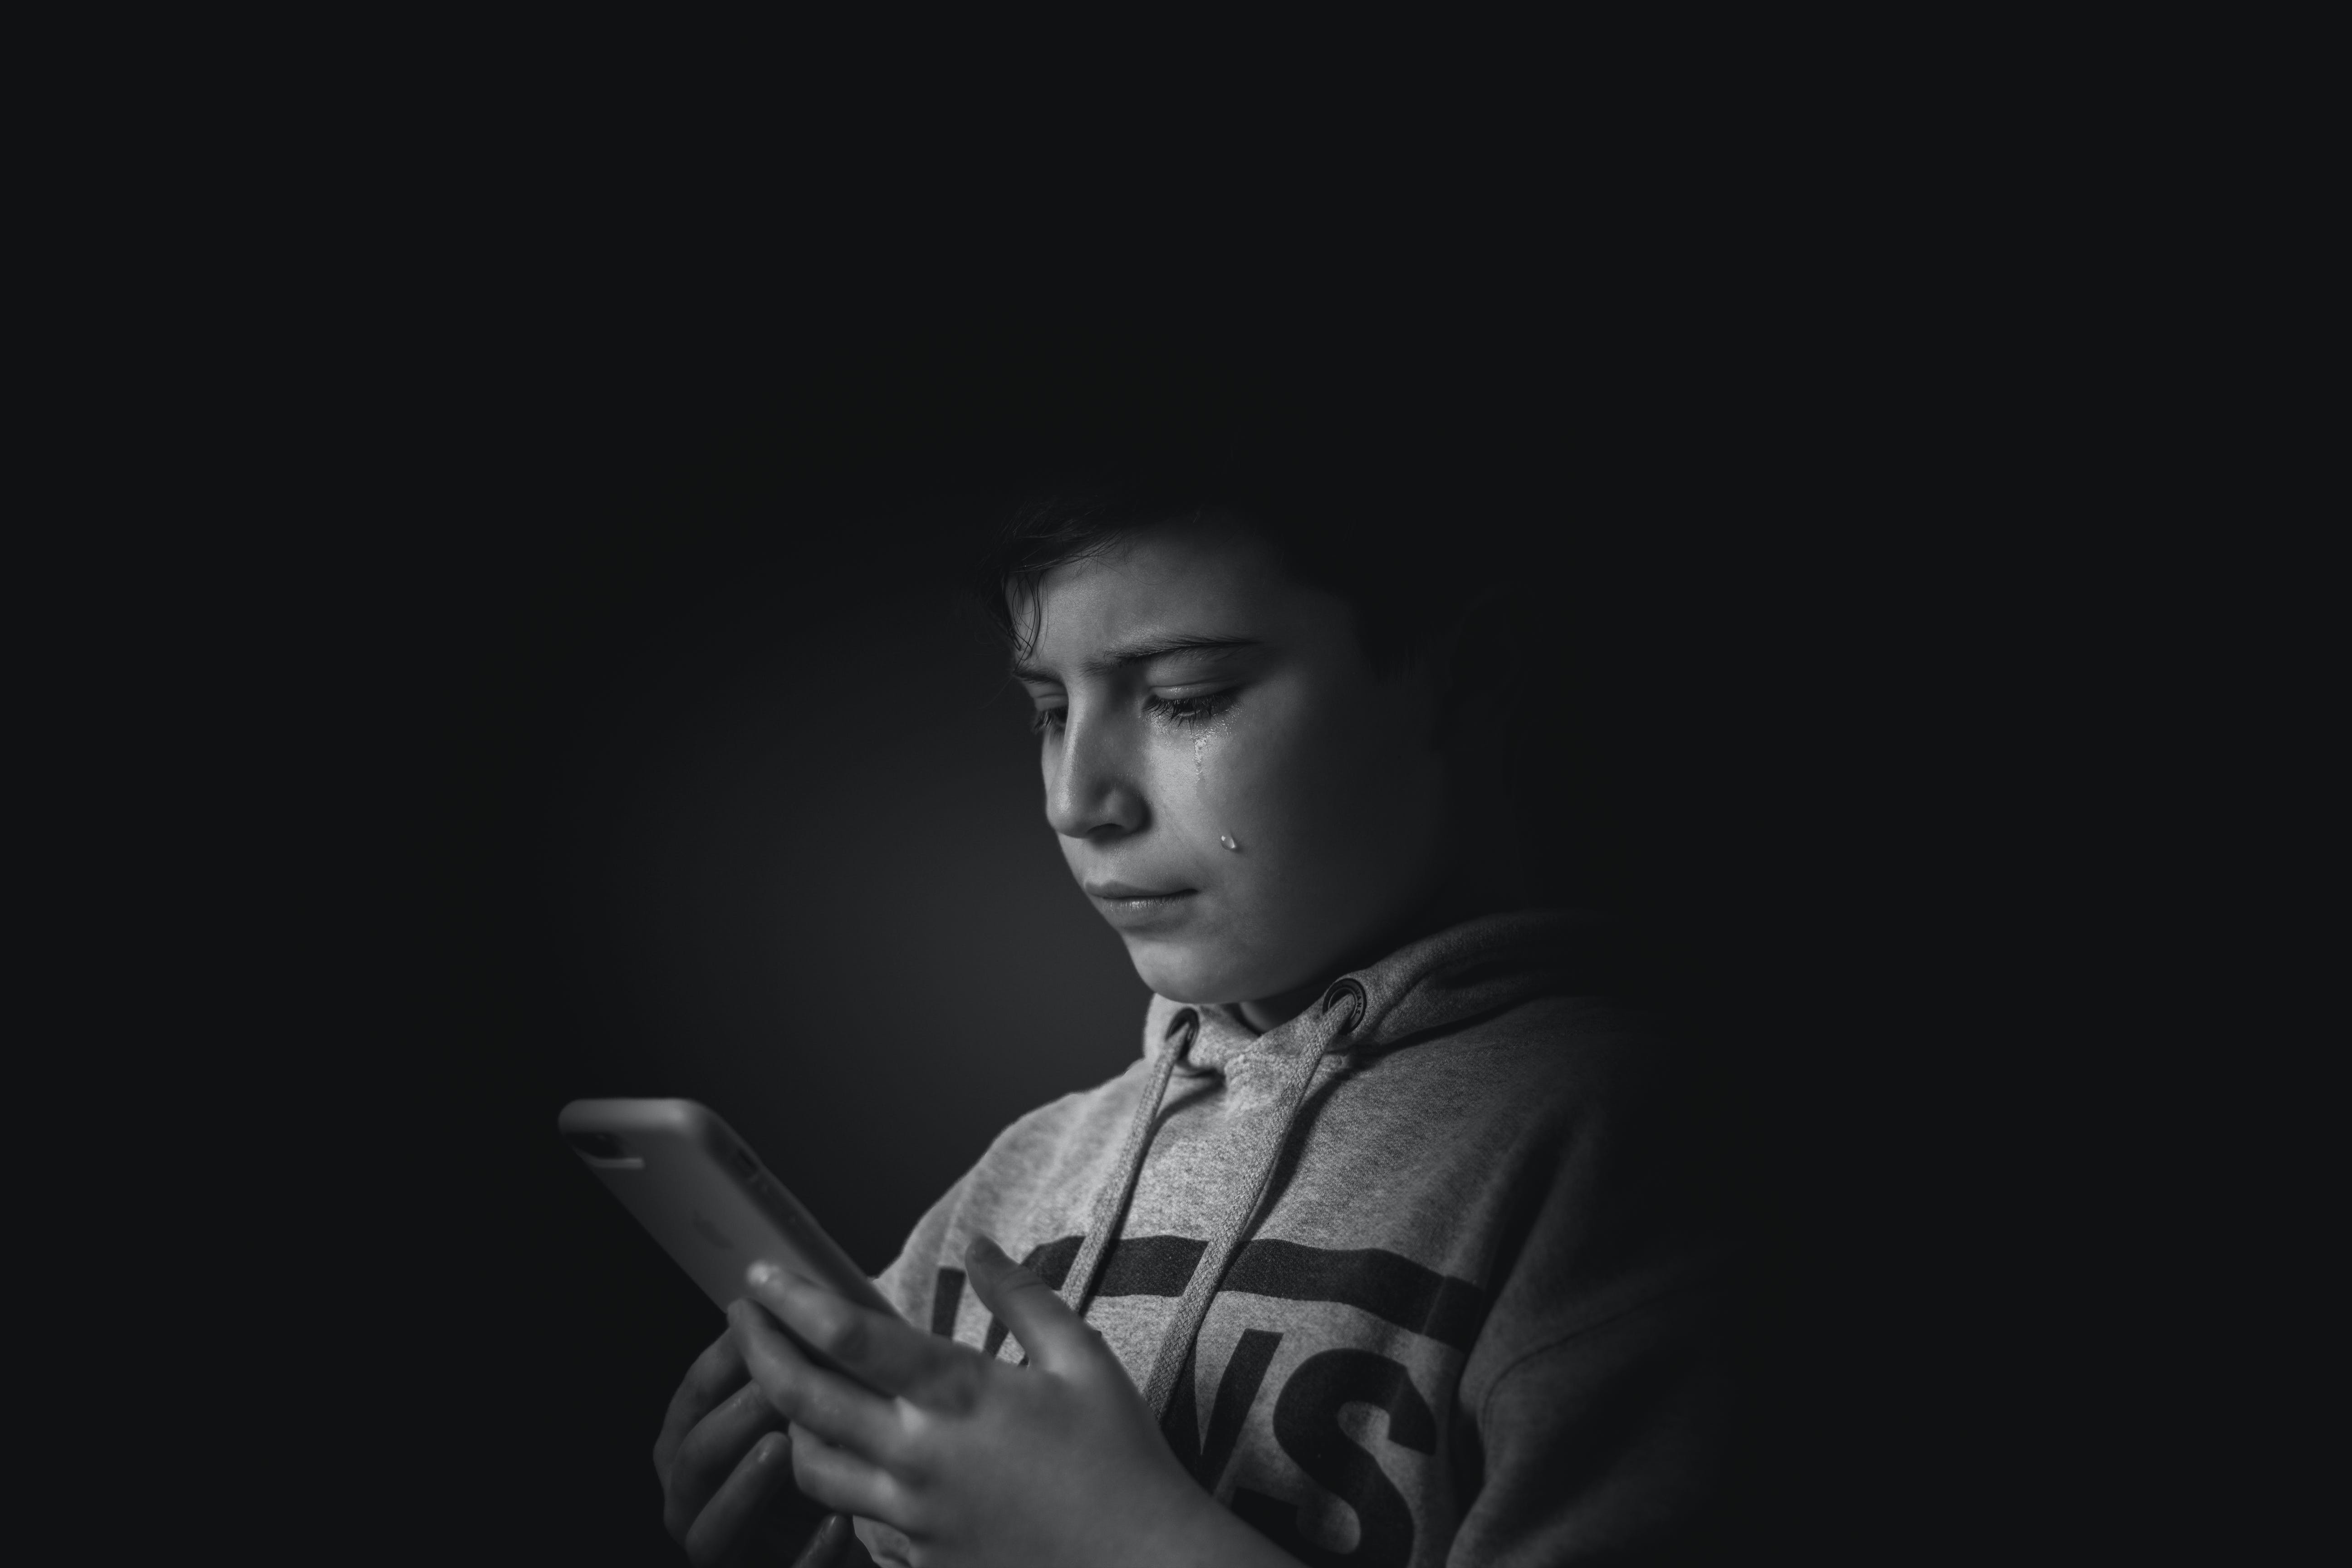 Crying boy is looking at the dead phone | Source: Pexels.com